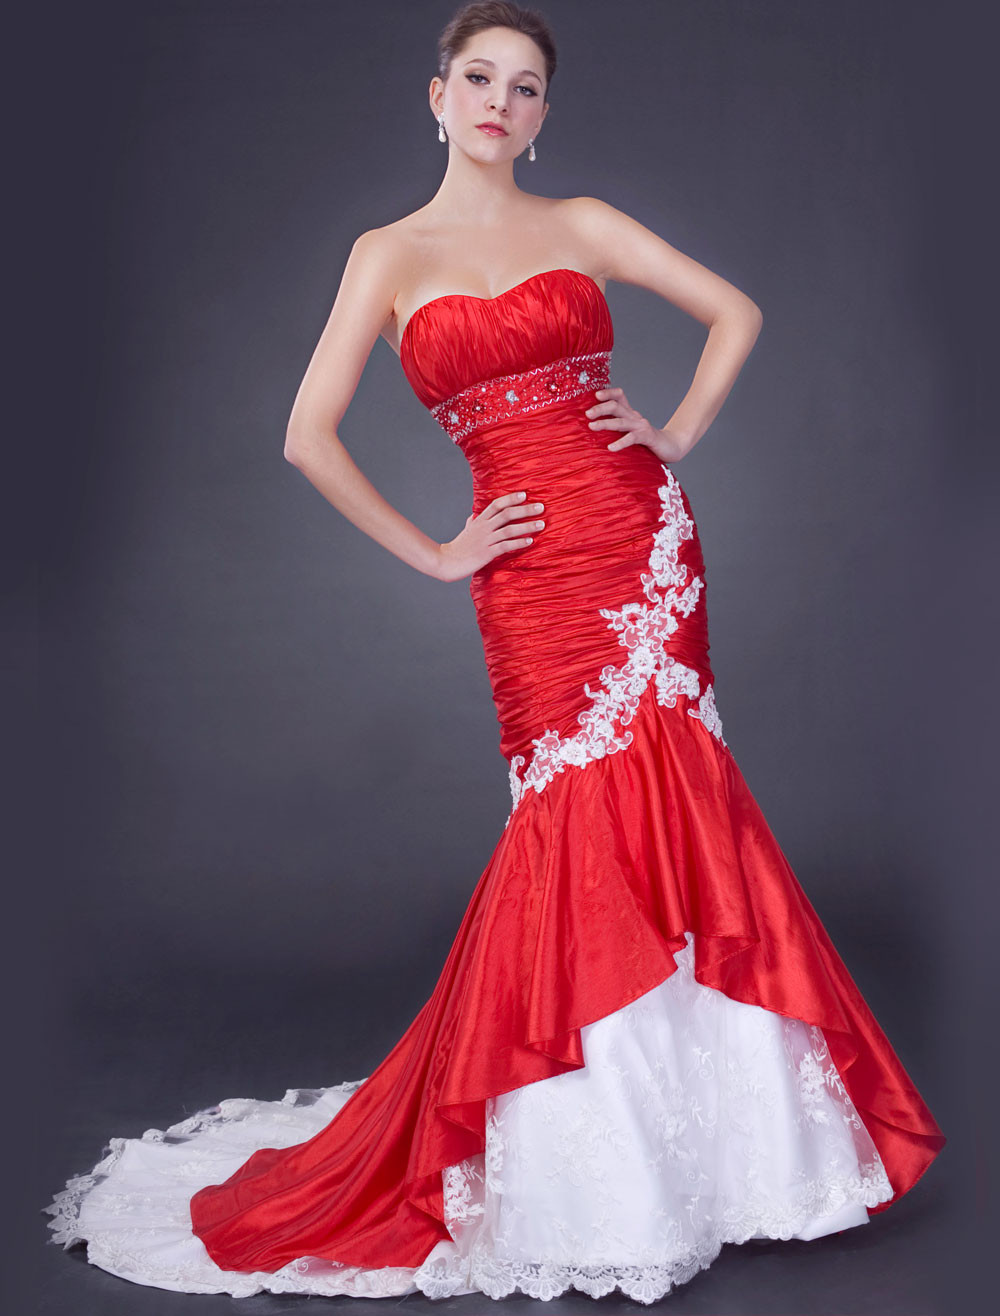 Red Wedding Gowns
 Wallpapers Background Bridal Red Wedding Dresses